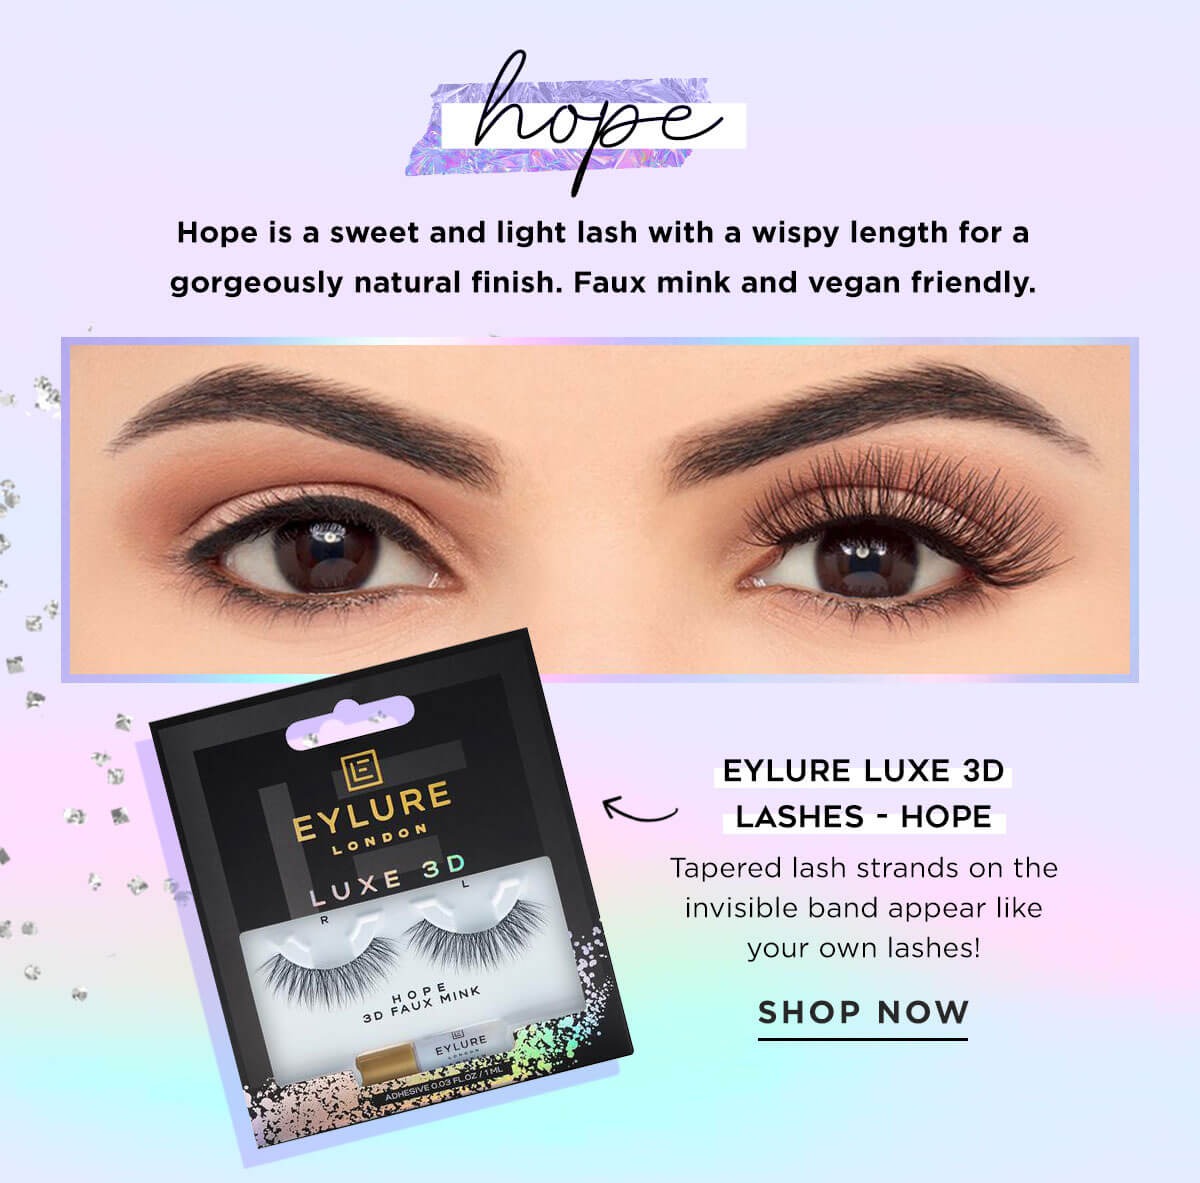 EYLURE LUXE 3D LASHES - HOPE